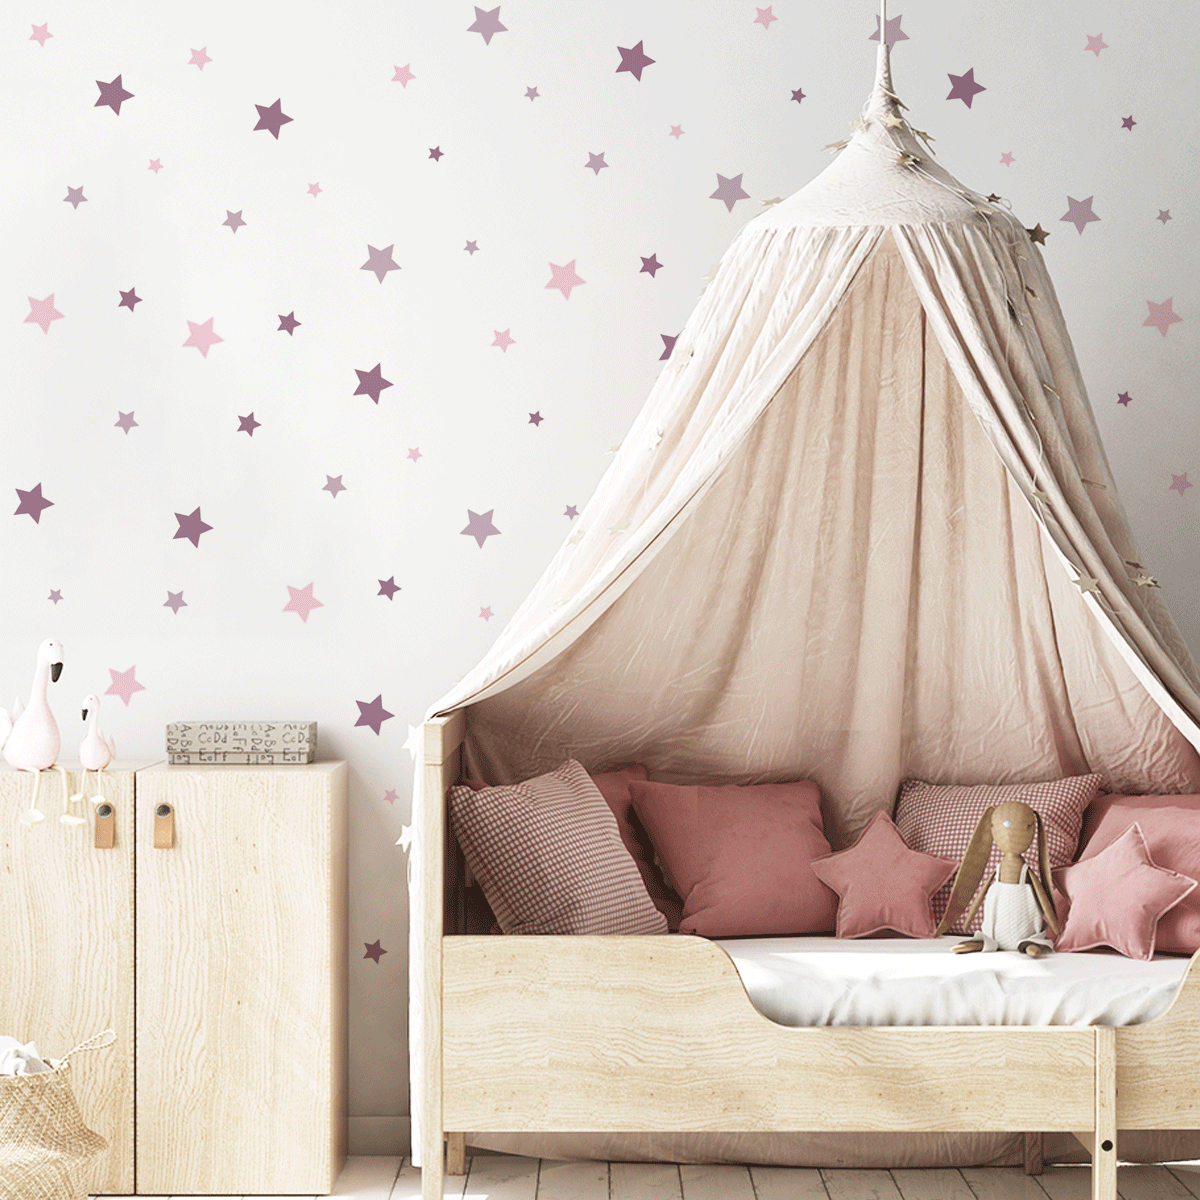 wall decal, purple and pink stars wall stickers, wall stickers with stars, wall decal with stars, wall sticker with stars, nursery pattern sticker, wall sticker, boys wall sticker, wall tattoo, nursery wall tattoo, kids bedroom wall tattoo, kids bedroom wall sticker, nursery wall sticker, kids bedroom ideas, nursery ideas, nursery decoration ideas, children room ideas